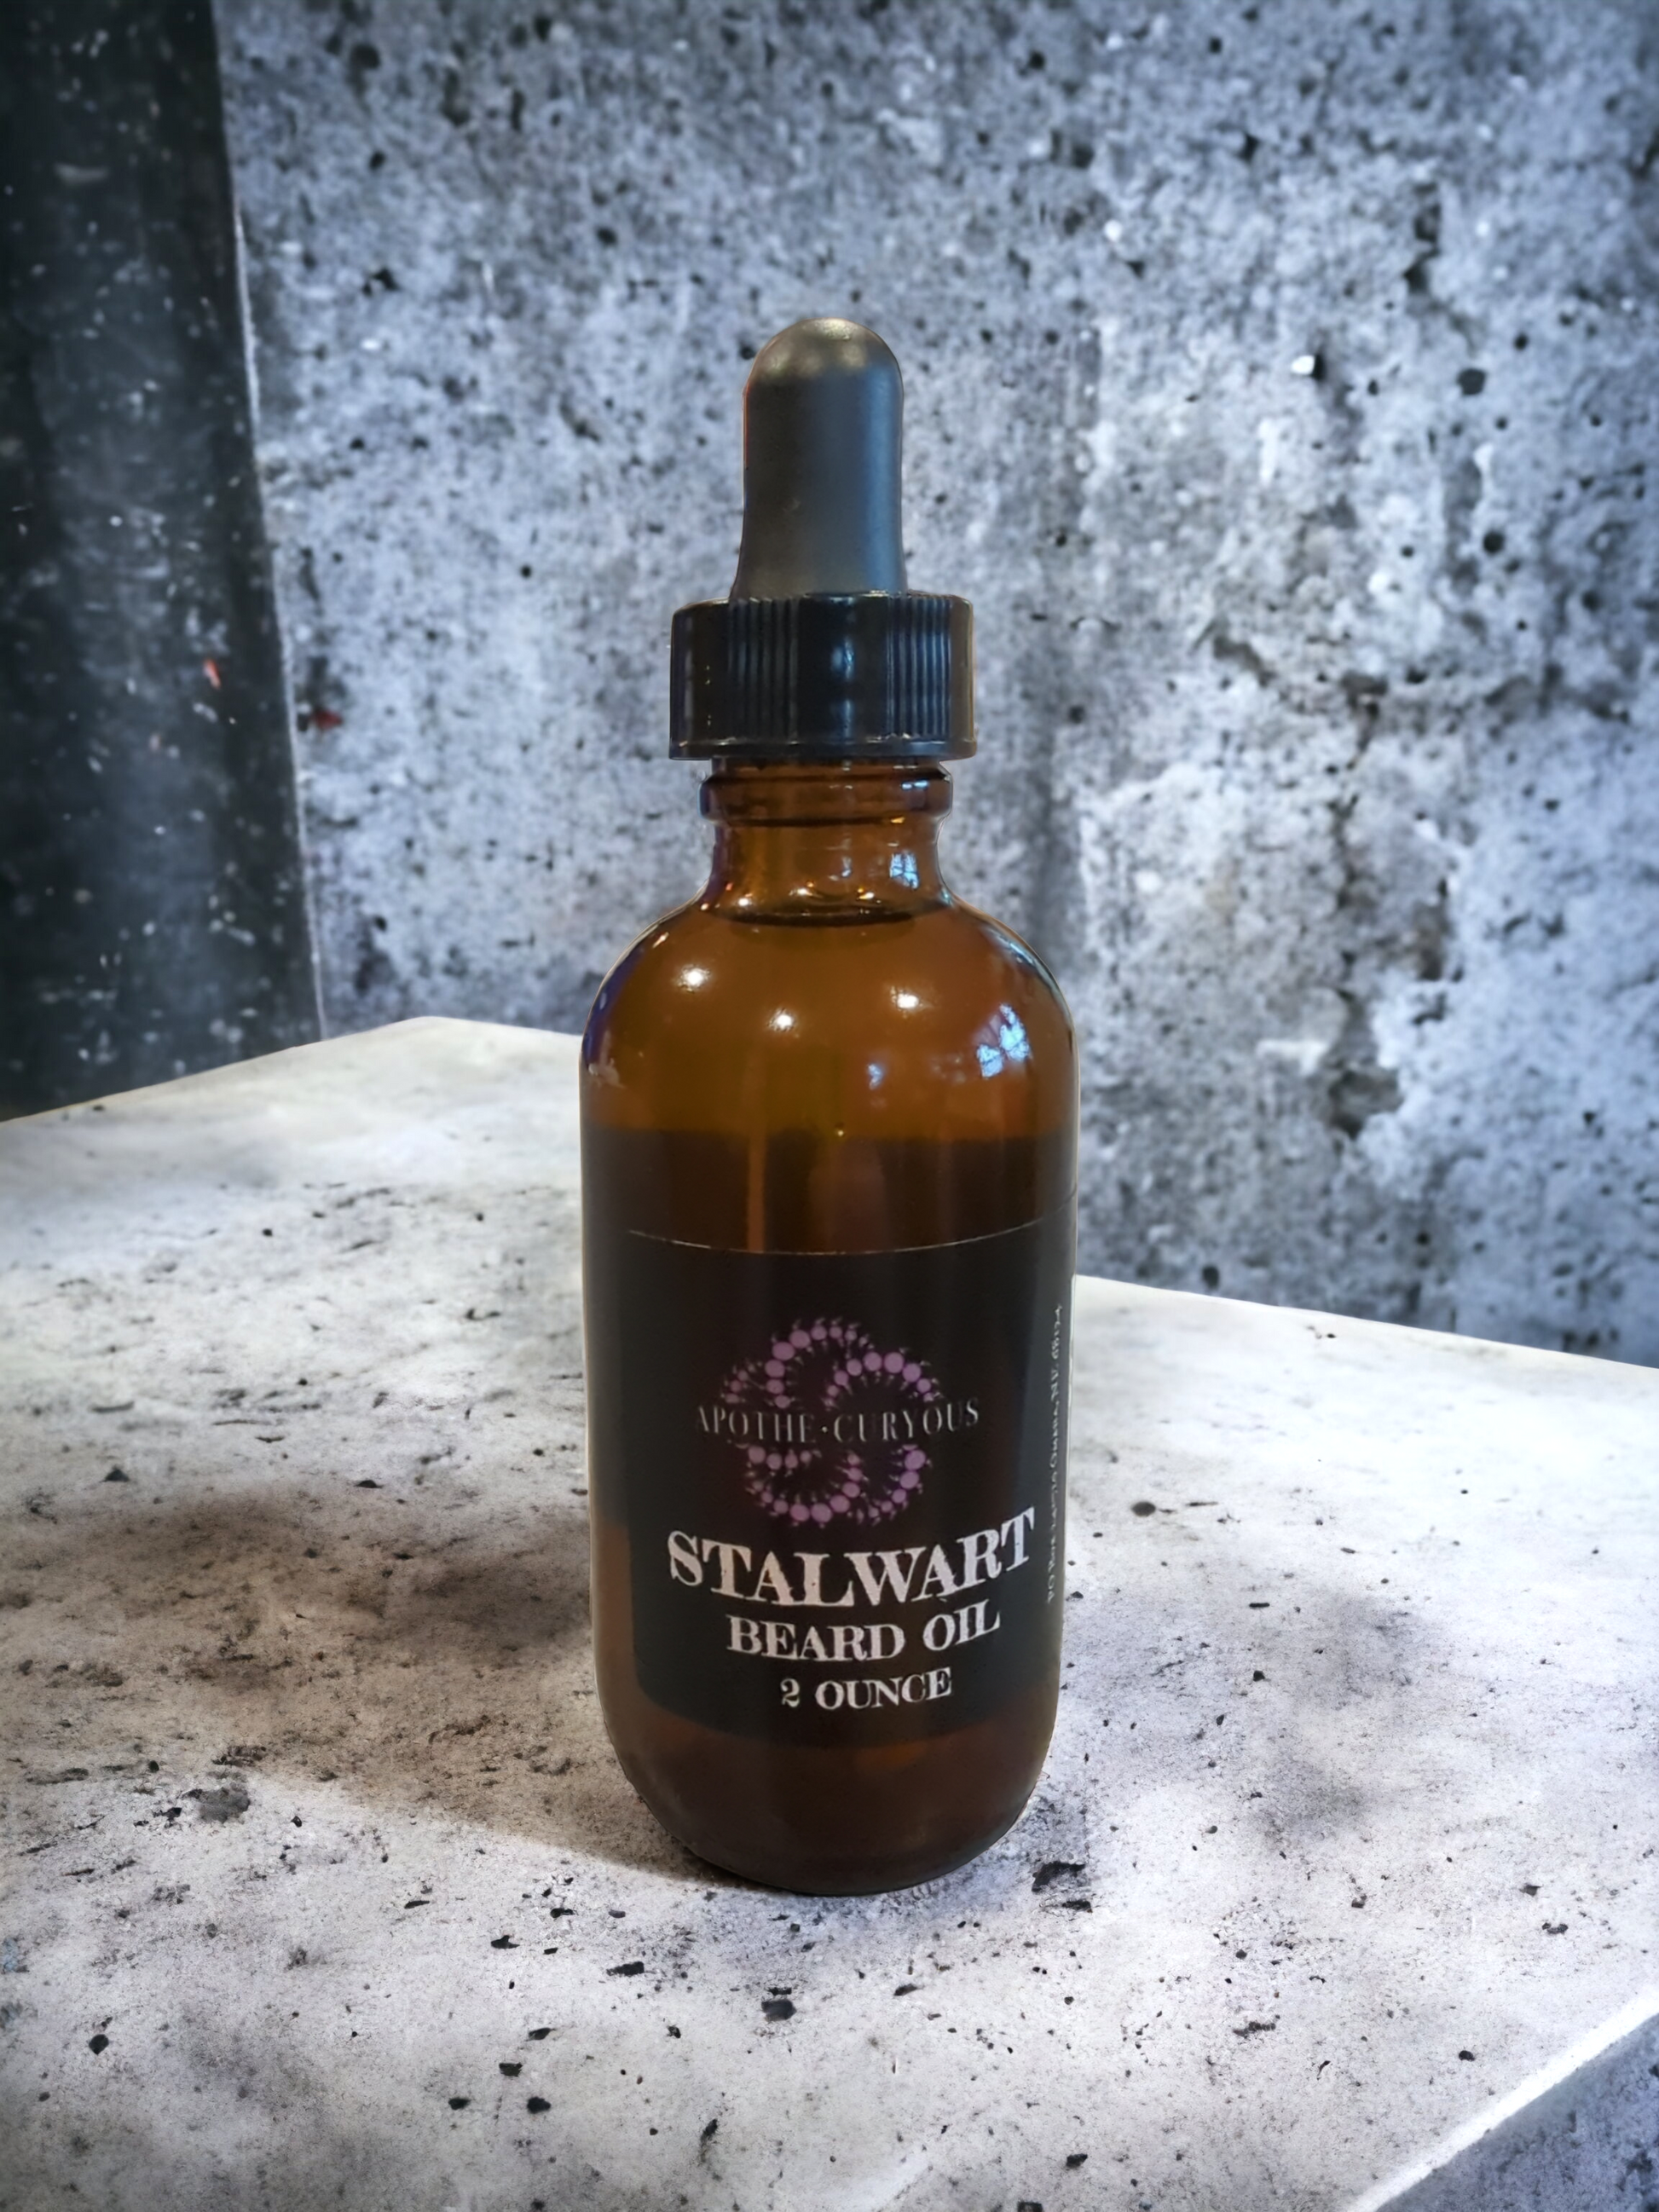 Stalwart beard oil on counter, 2 ounce glass bottle with dropper top, Apothecuryous